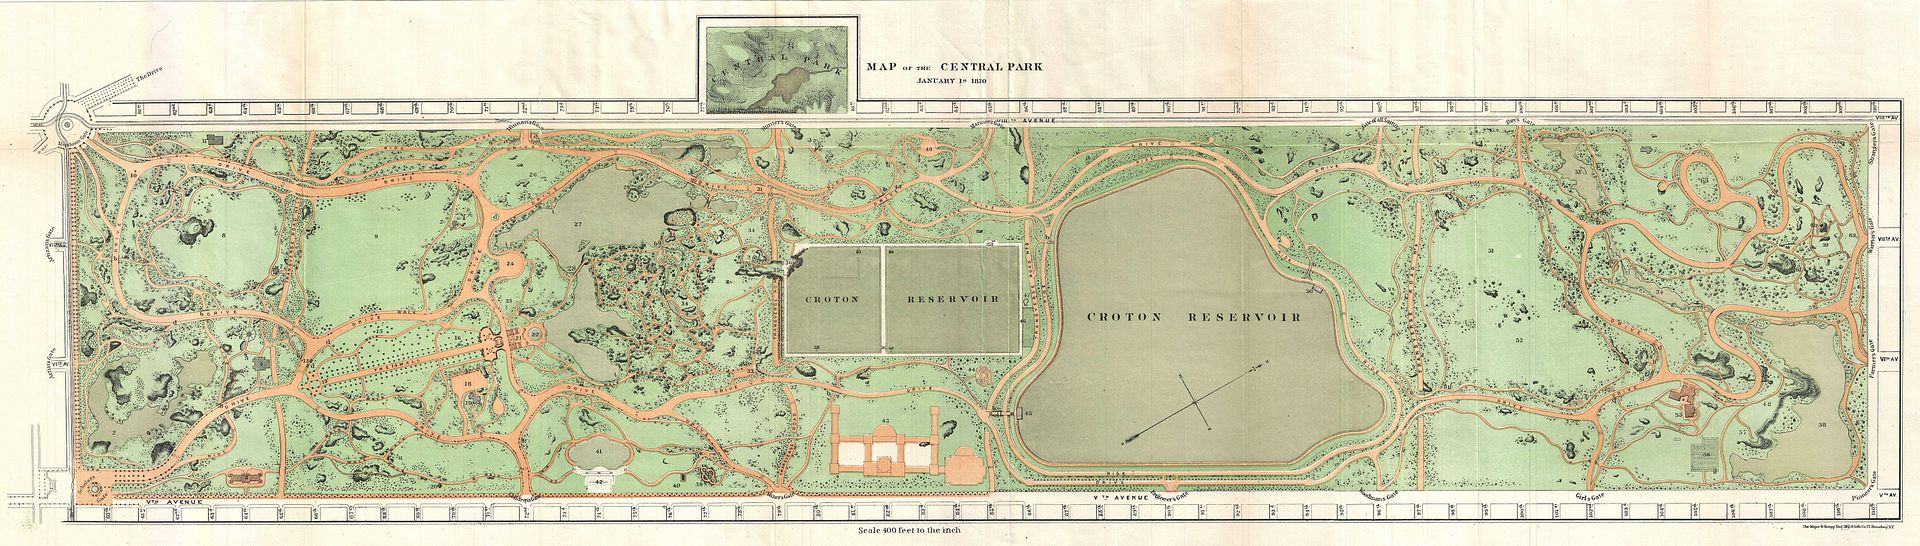 1870_Vaux_and_Olmstead_Map_of_Central_Park_New_York_City_-_Geographicus_-_CentralPark-knapp-1870.jpg